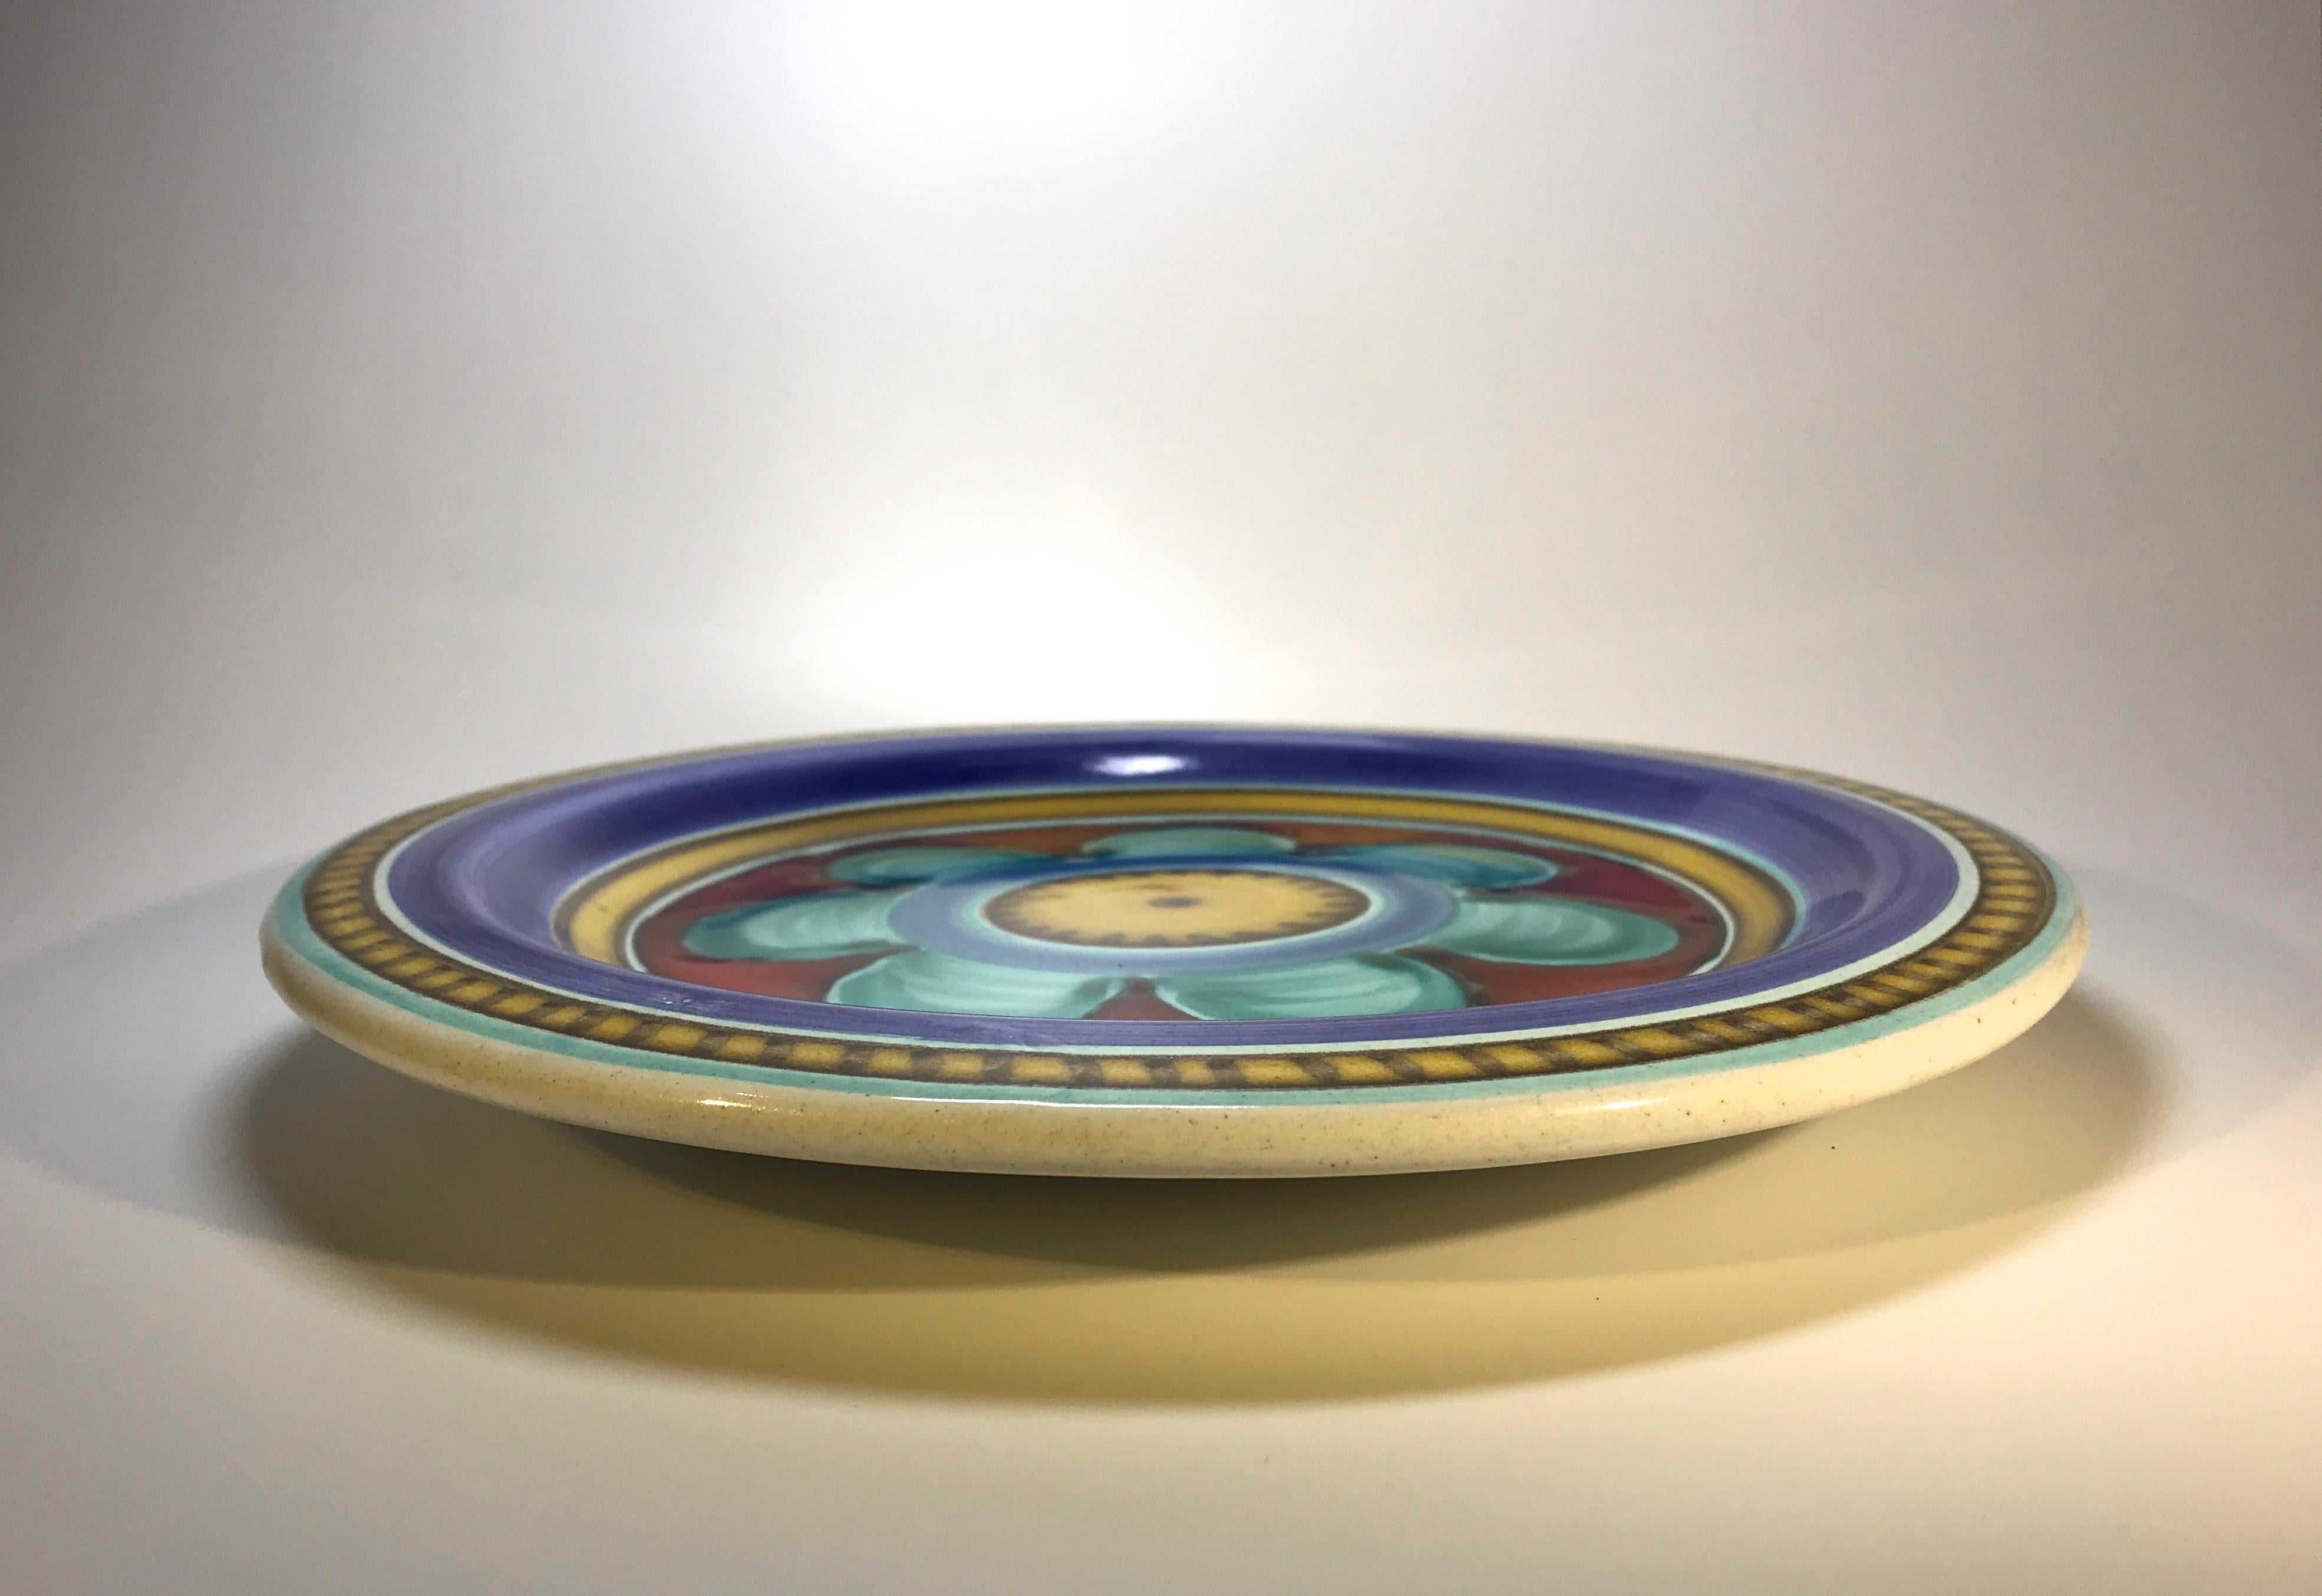 Italian DeSimone of Italy, Hand Painted Colorful Ceramic Plate, 1960s For Sale